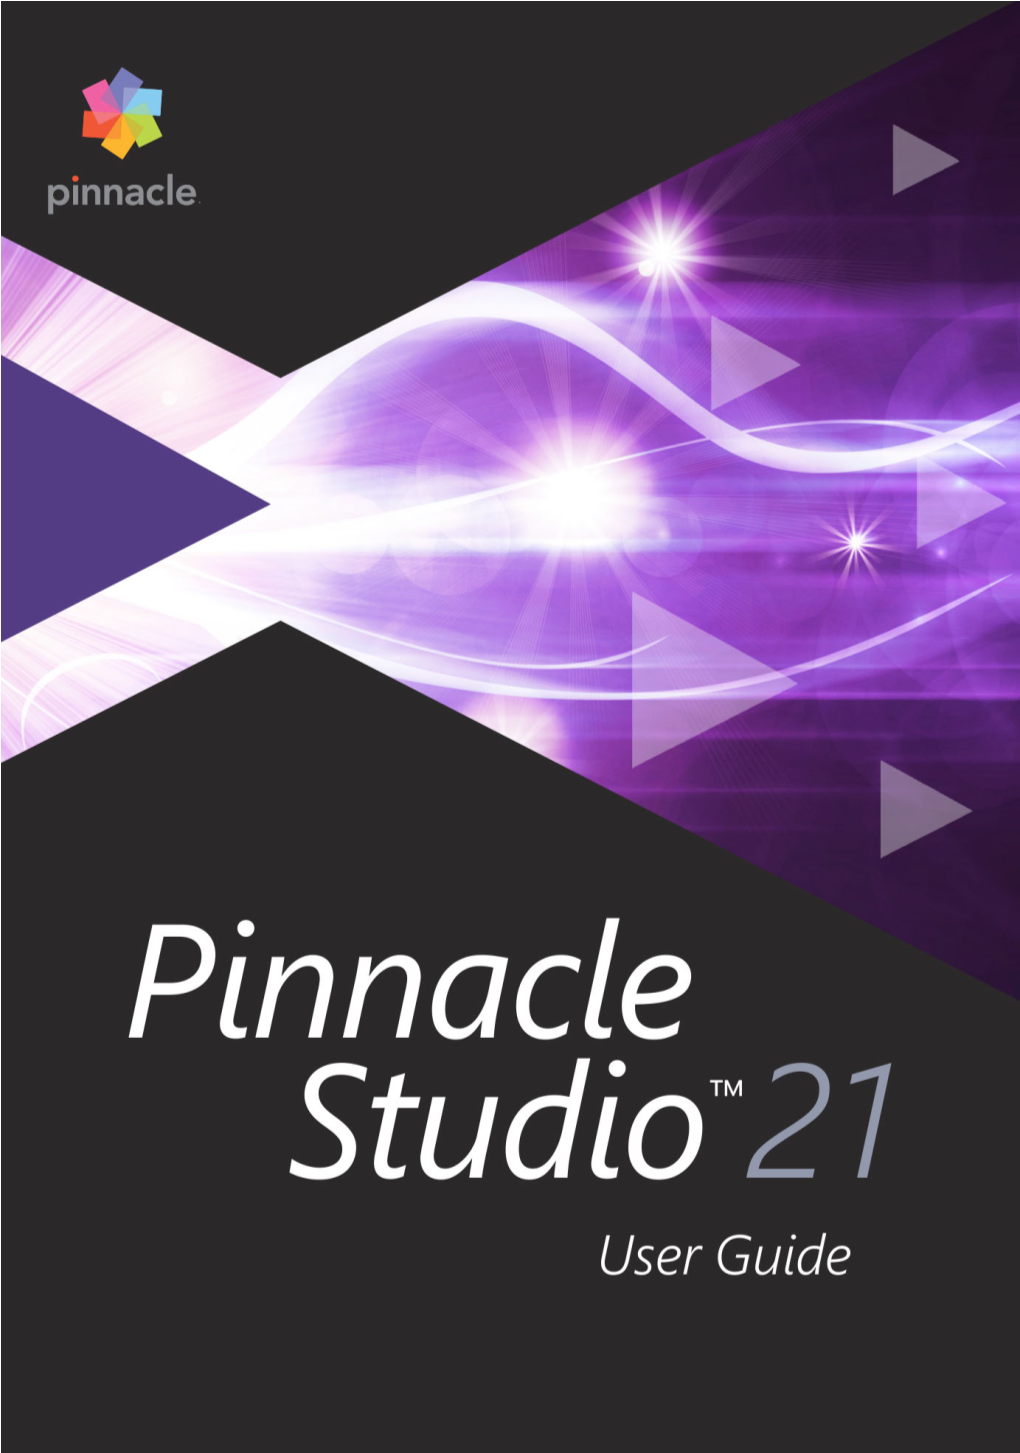 Pinnacle Studio 21 User Guide PDF, and Other Community and Support Links